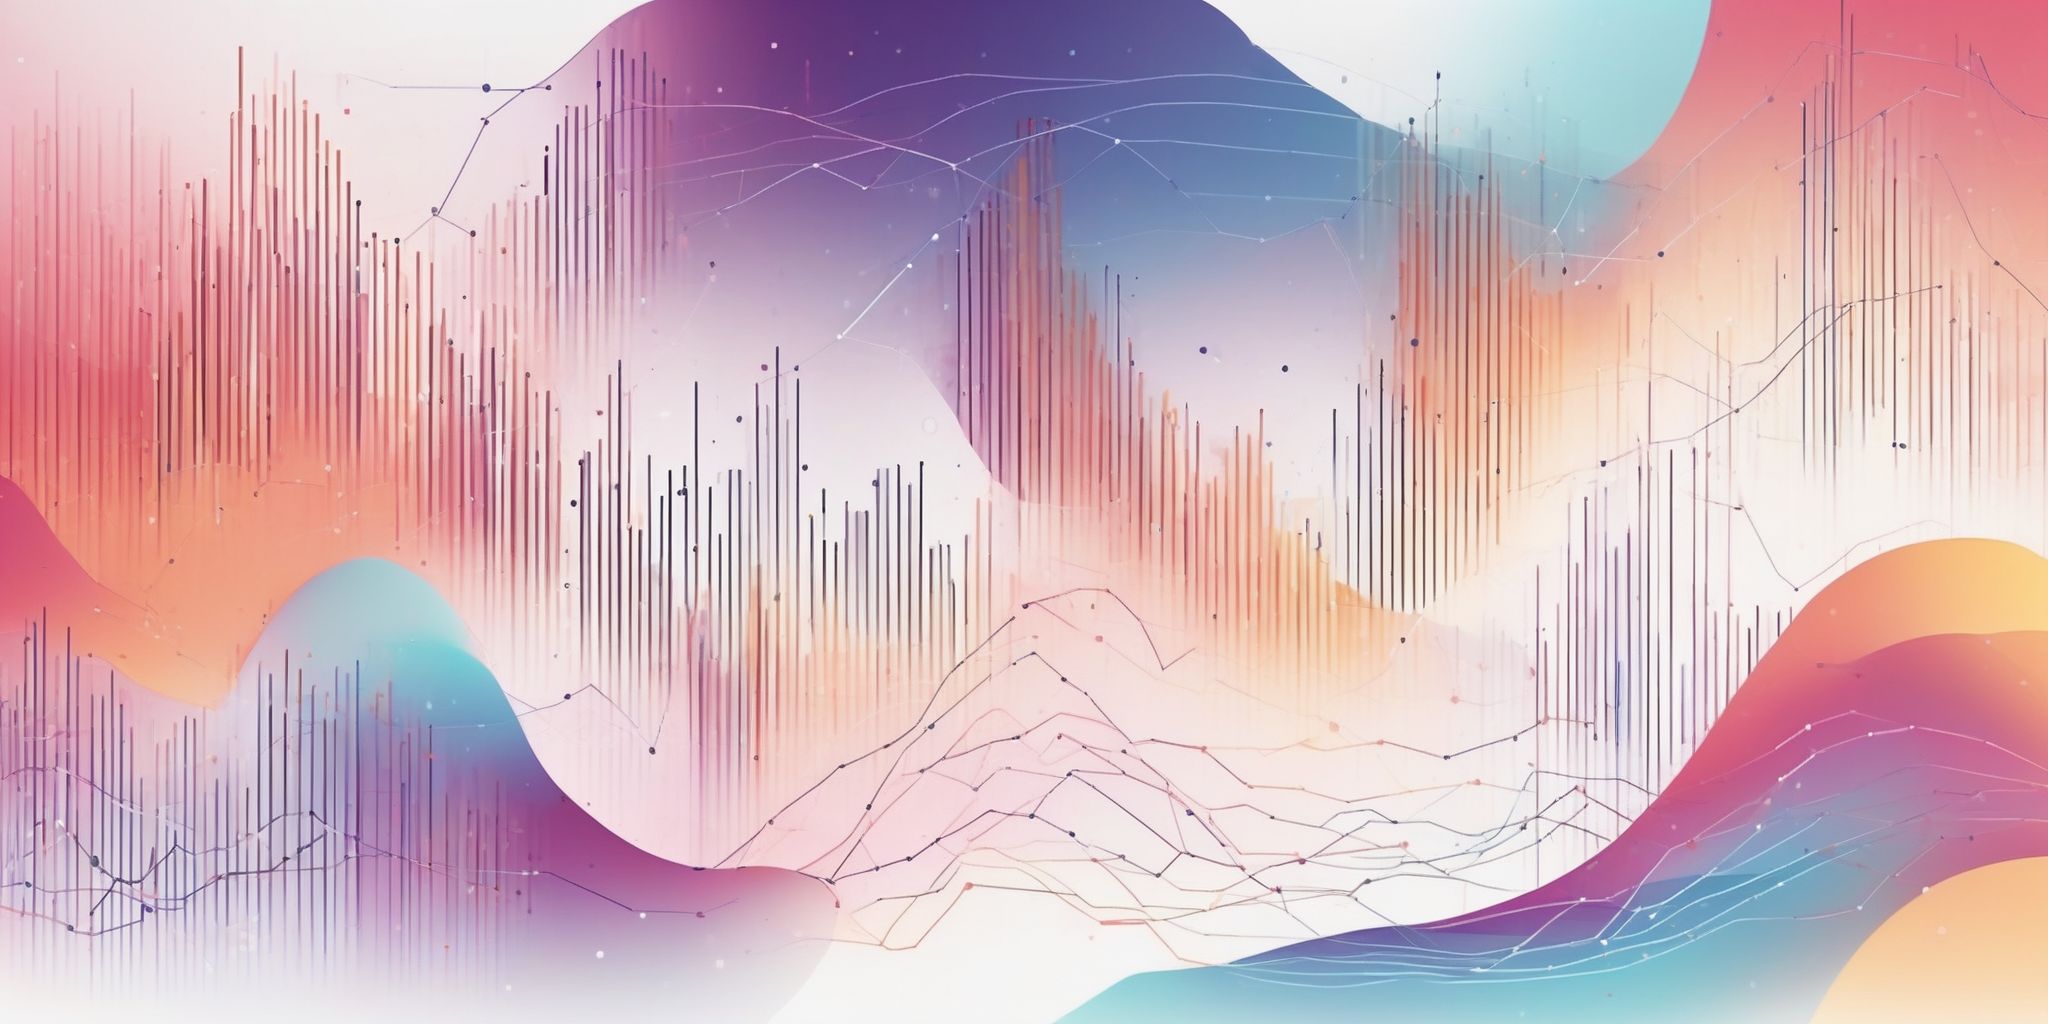 data in illustration style with gradients and white background